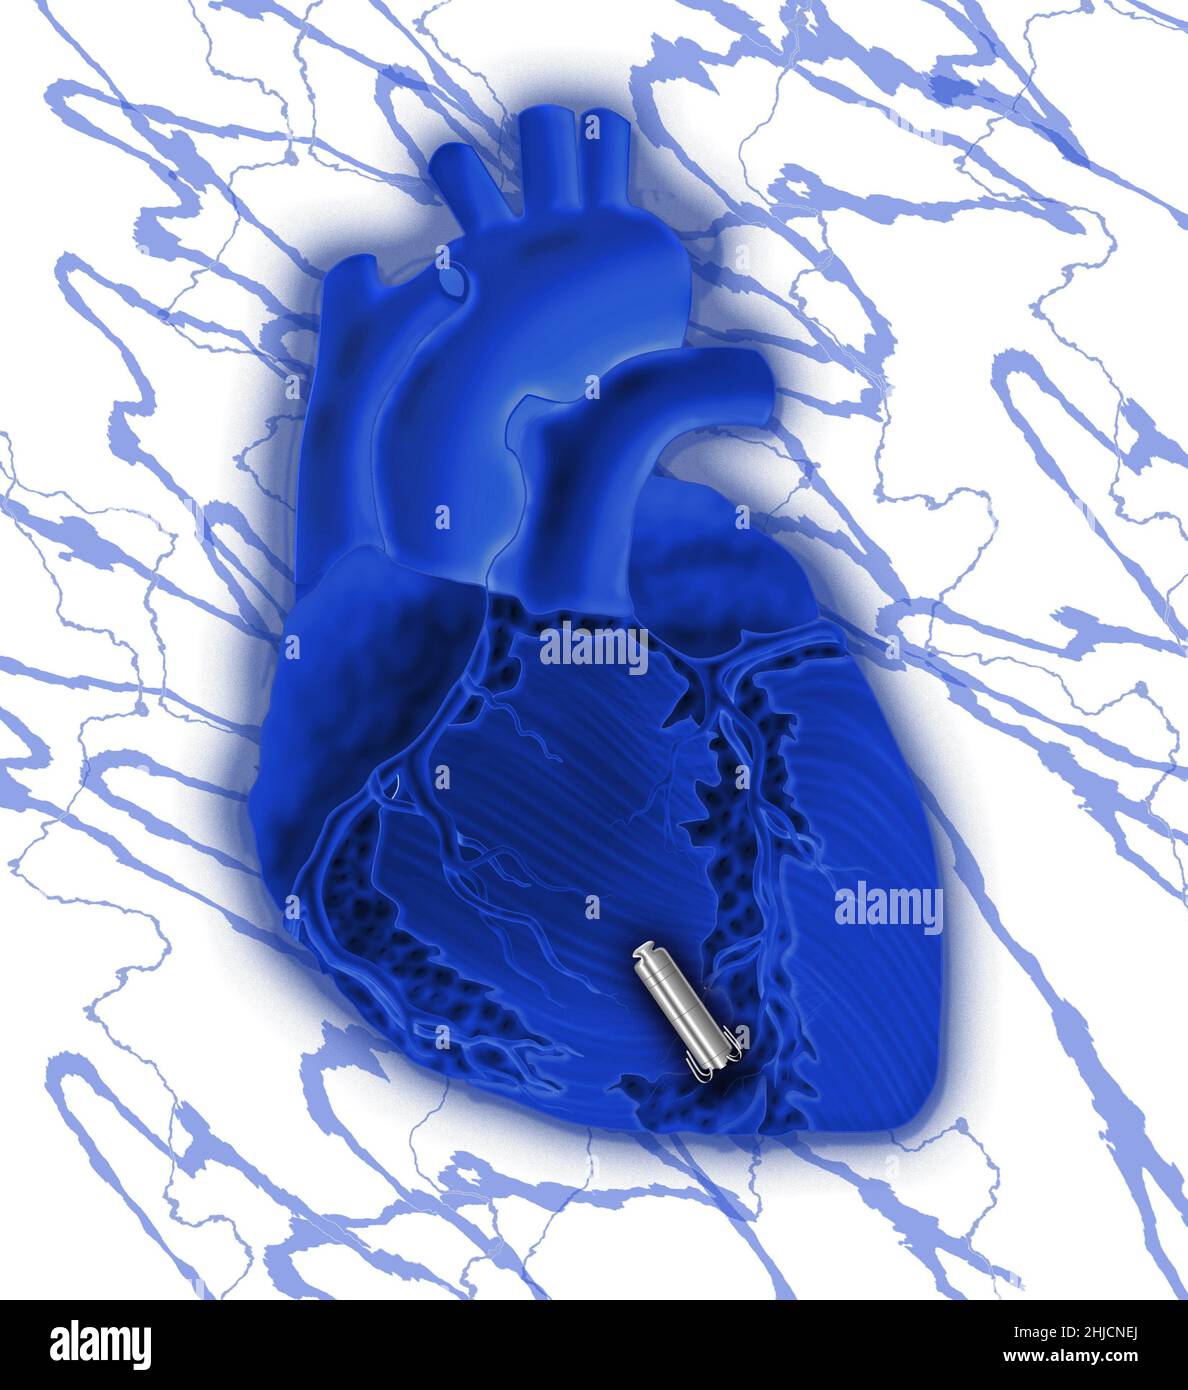 Conceptual image of a  leadless pacemaker. It  is much smaller than a traditional pacemaker and also had no leads from the pacemaker to the heart. It is placed into the heart itself via a leg vein, in the right ventricle. Stock Photo